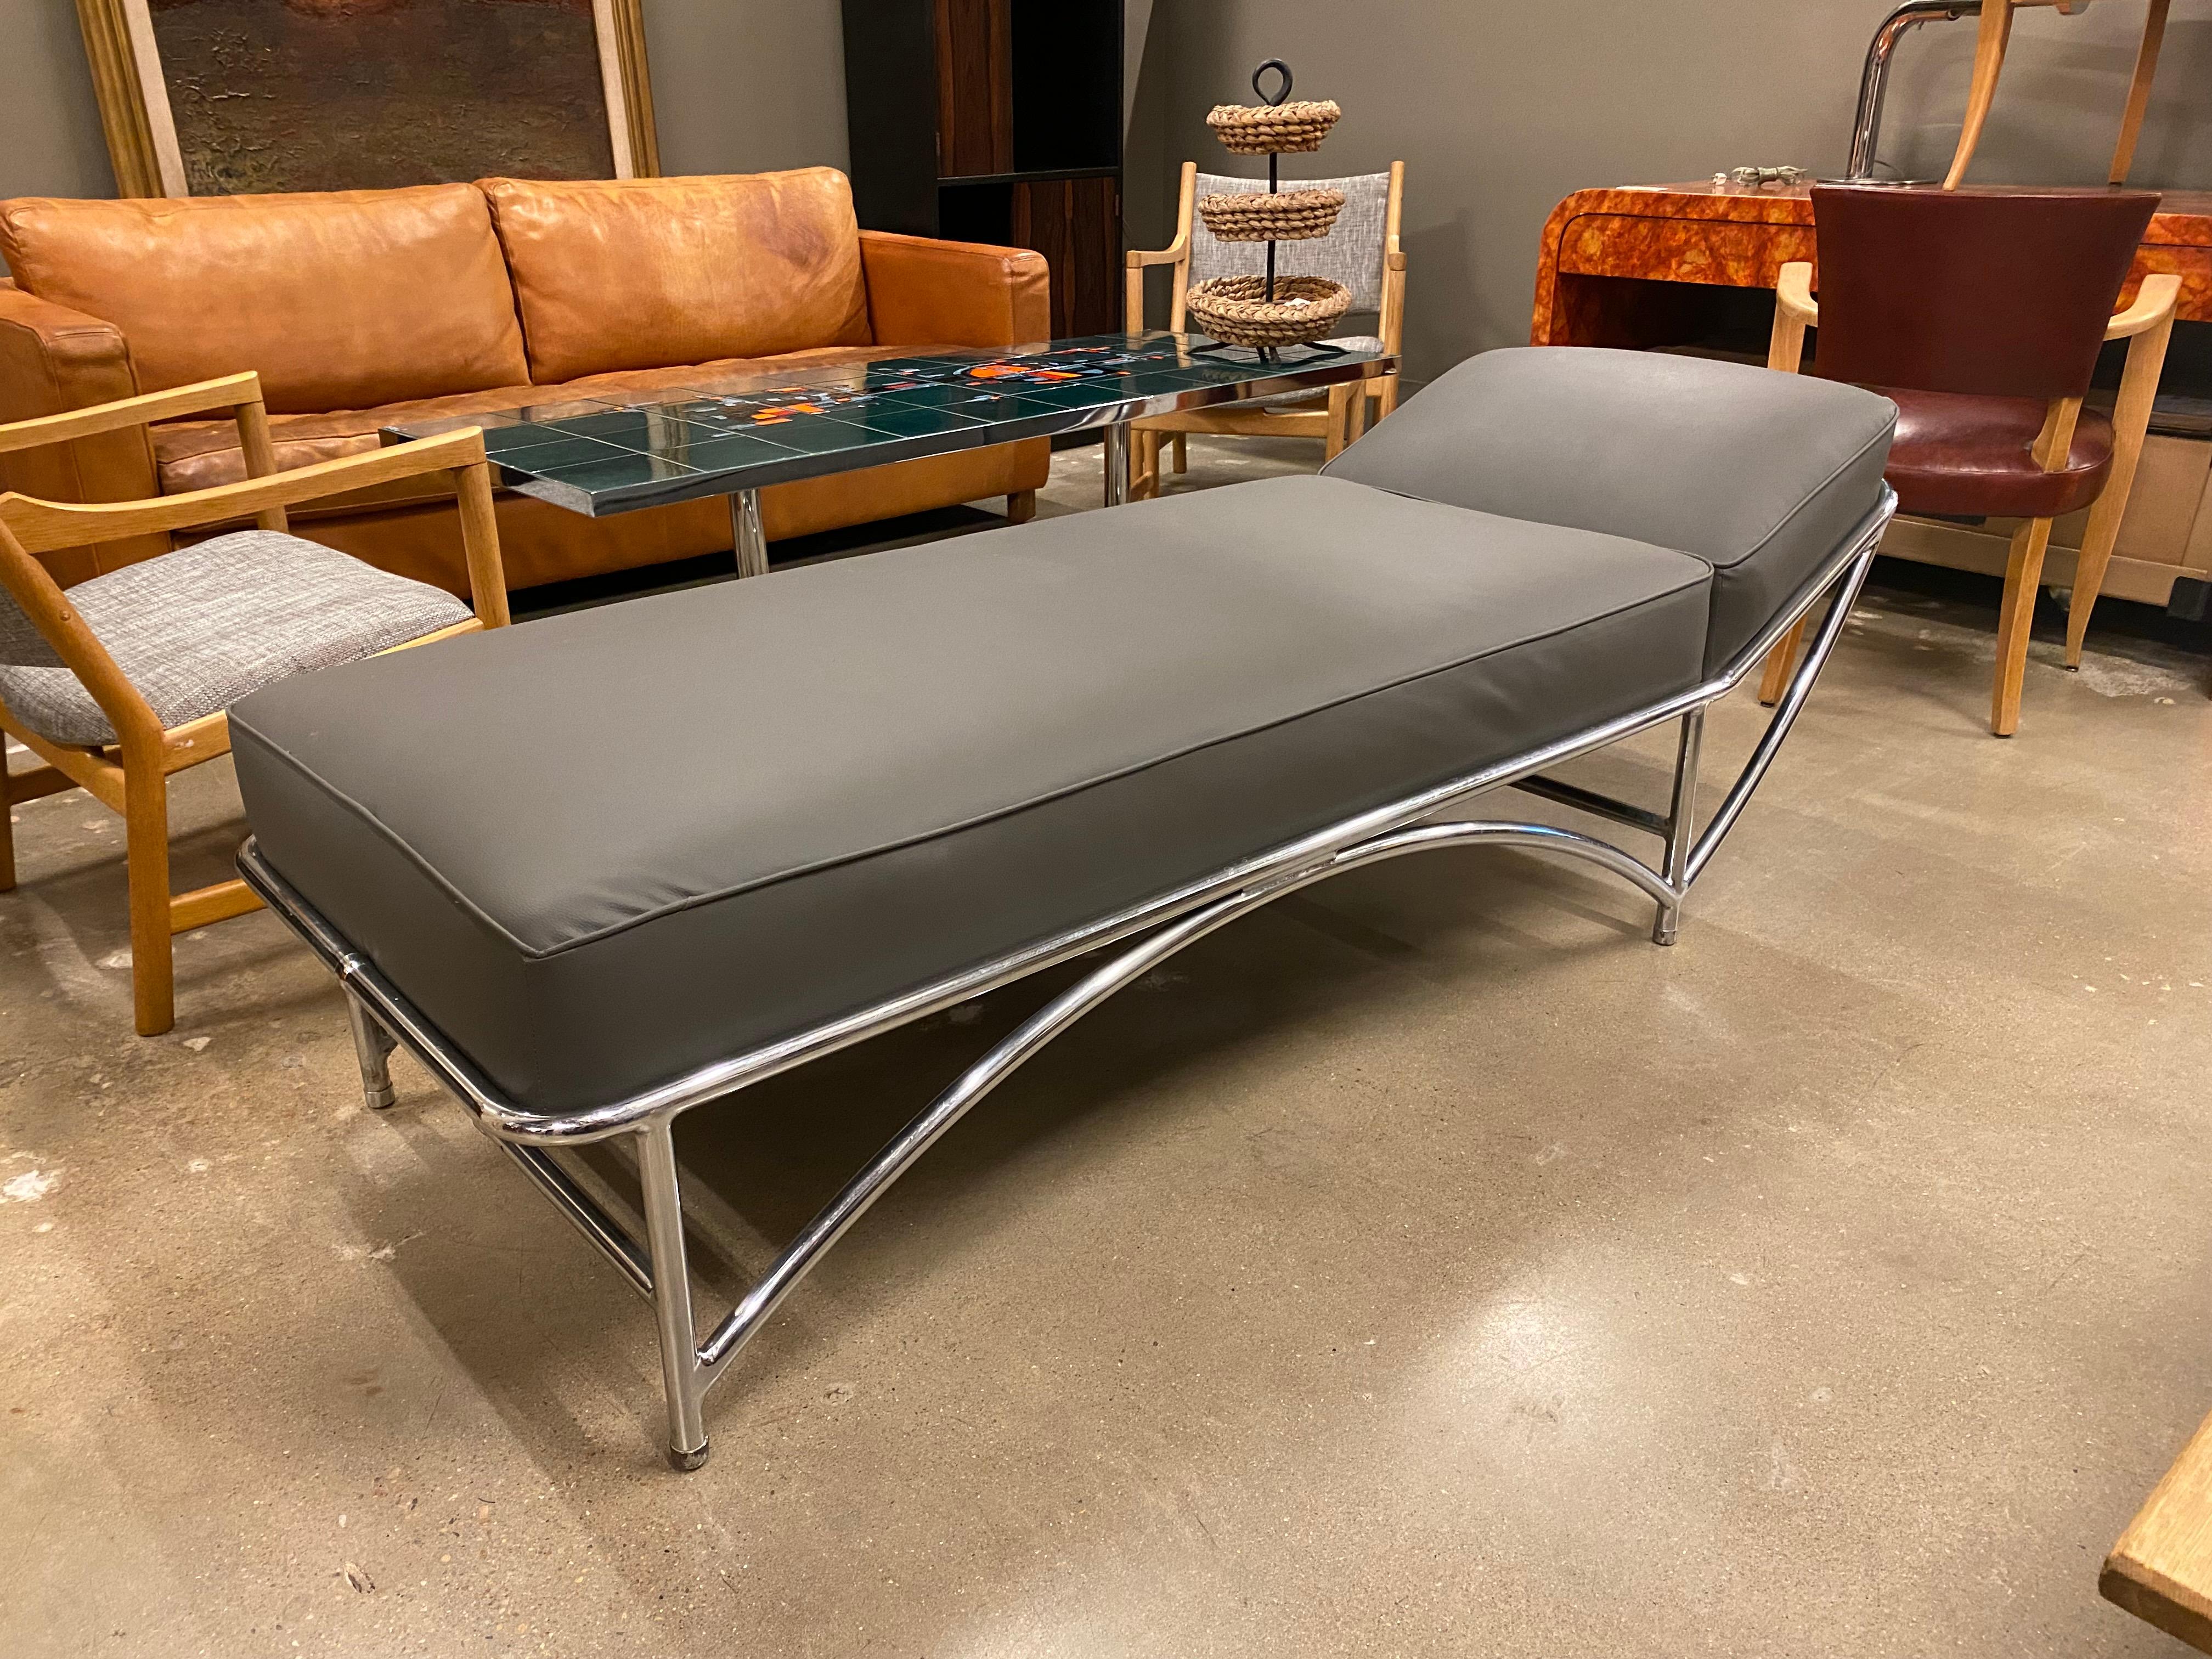 Art Deco/Machine Age daybed or chaise lounge by KEM Weber. Tubular steel in chrome finish with recently upholstered top in gray vinyl. c. 1930's Germany/United States.